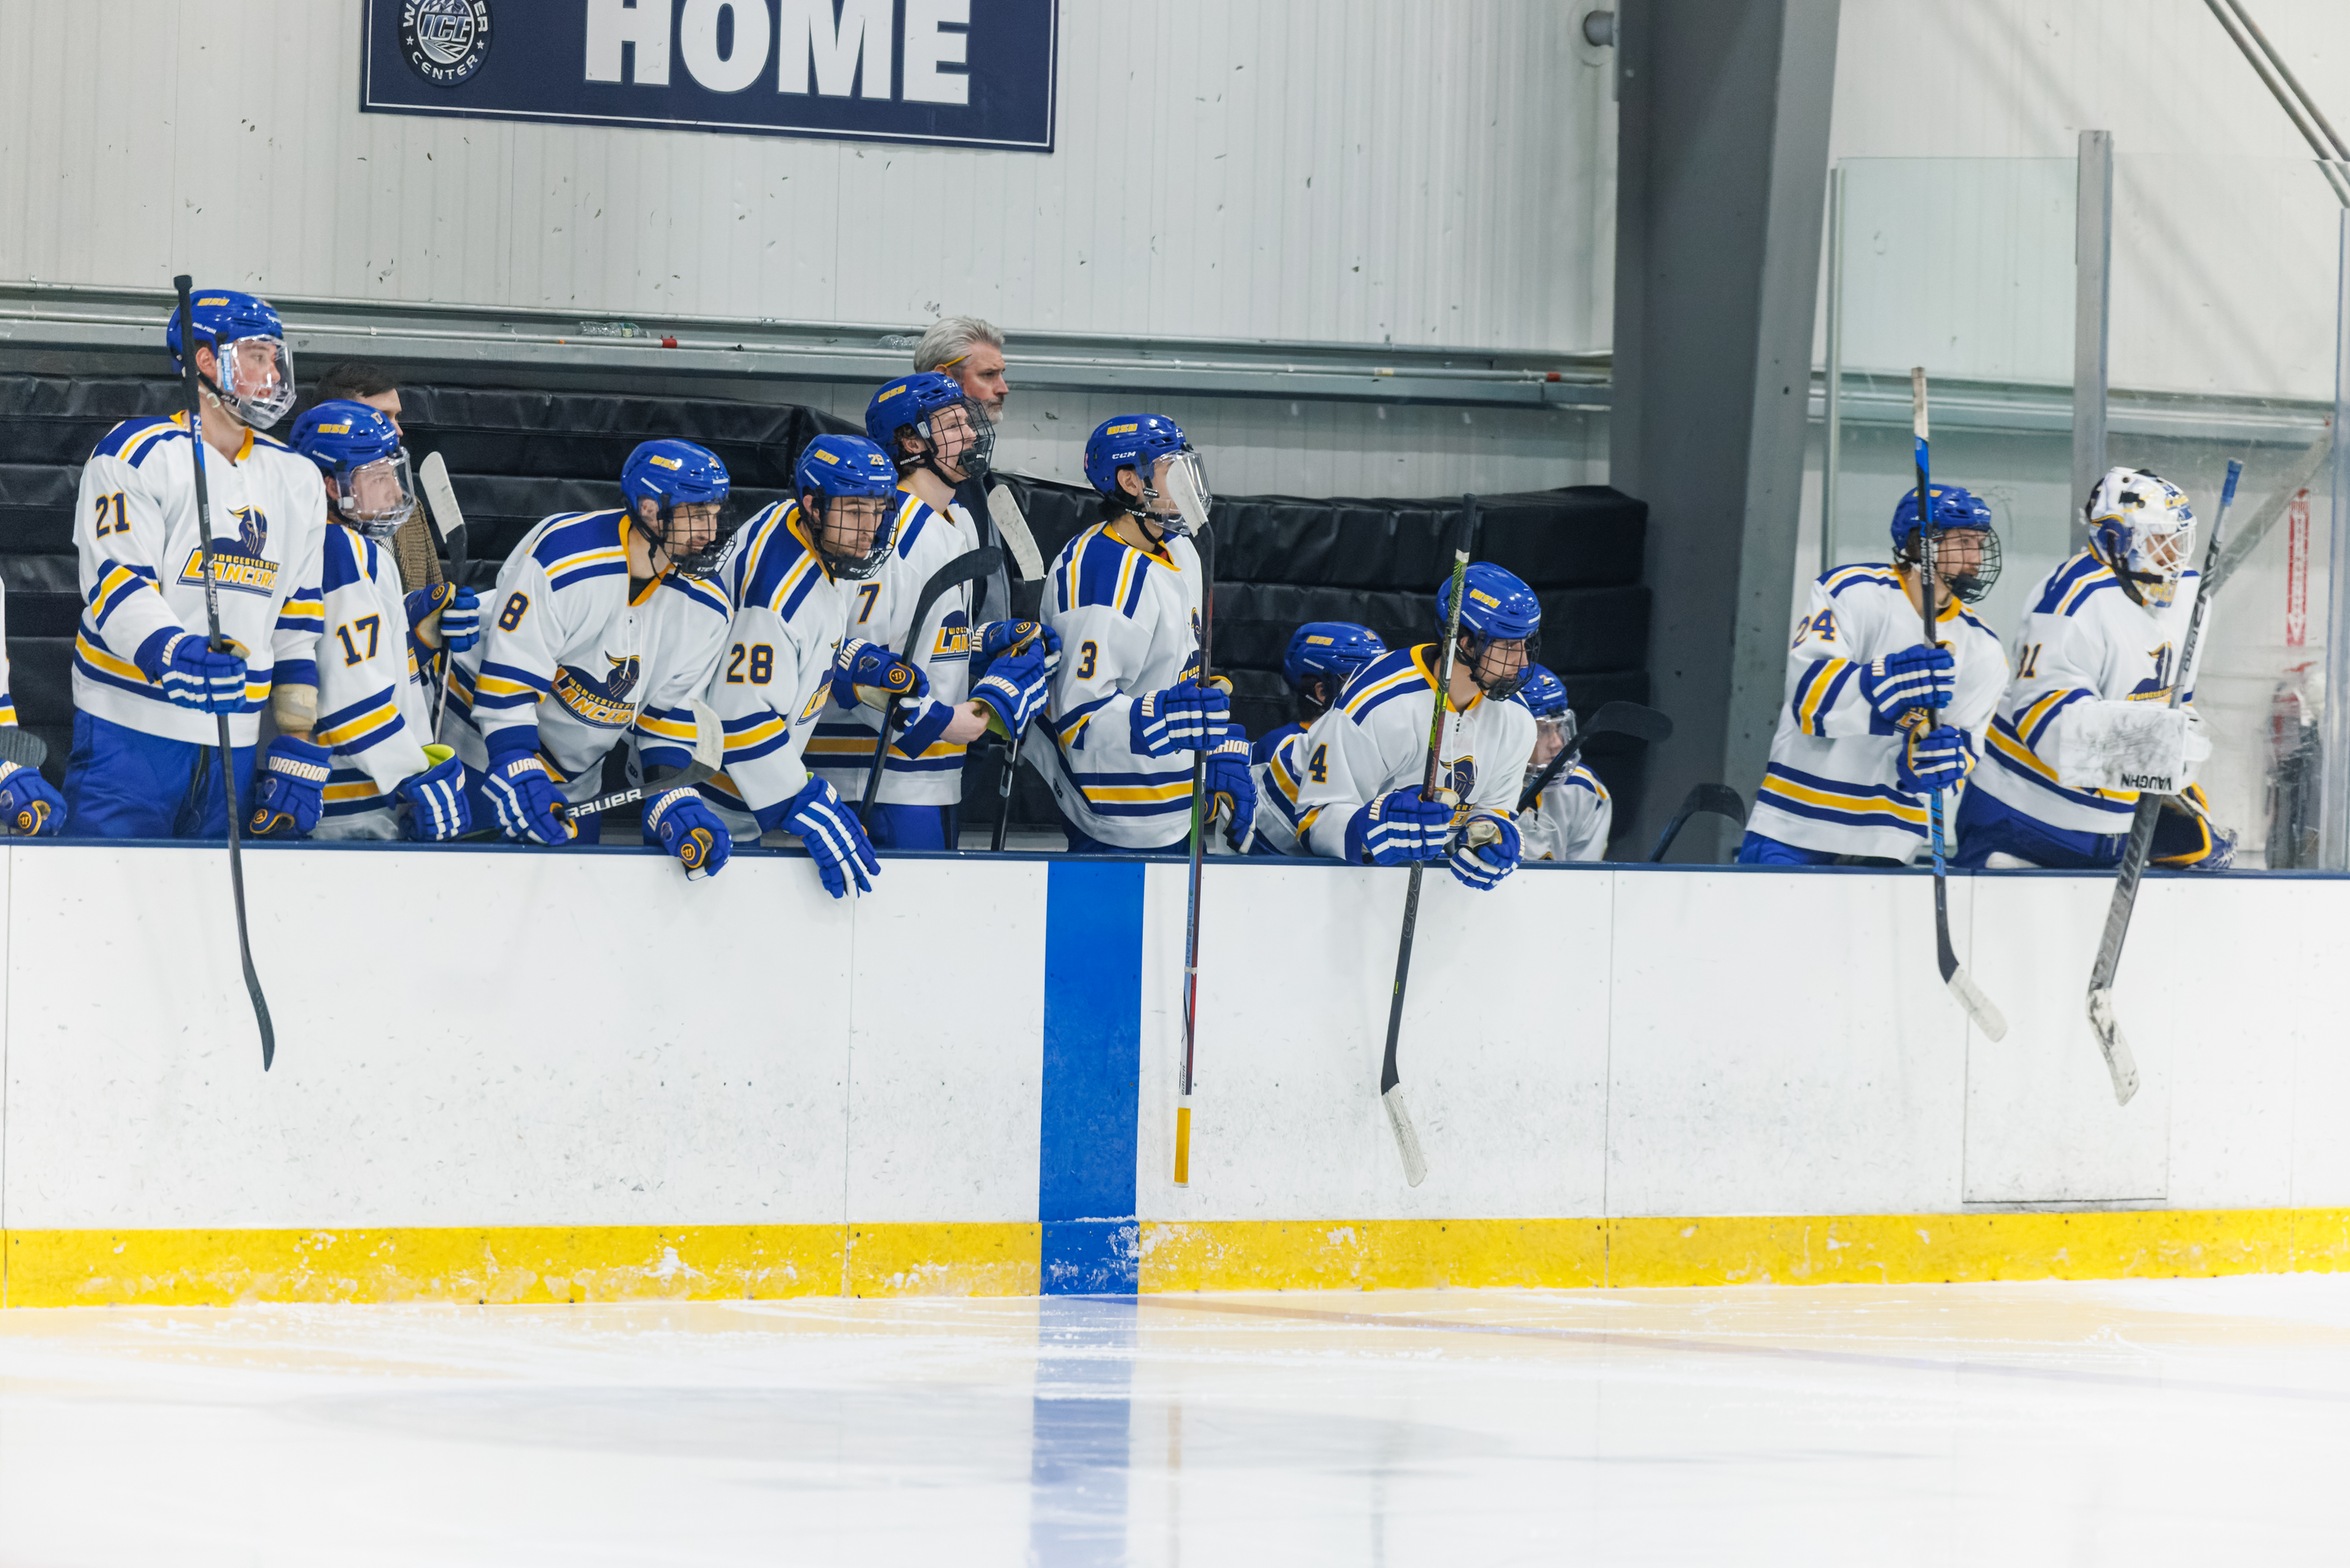 Worcester State Ignites for Big Win Versus Westfield State